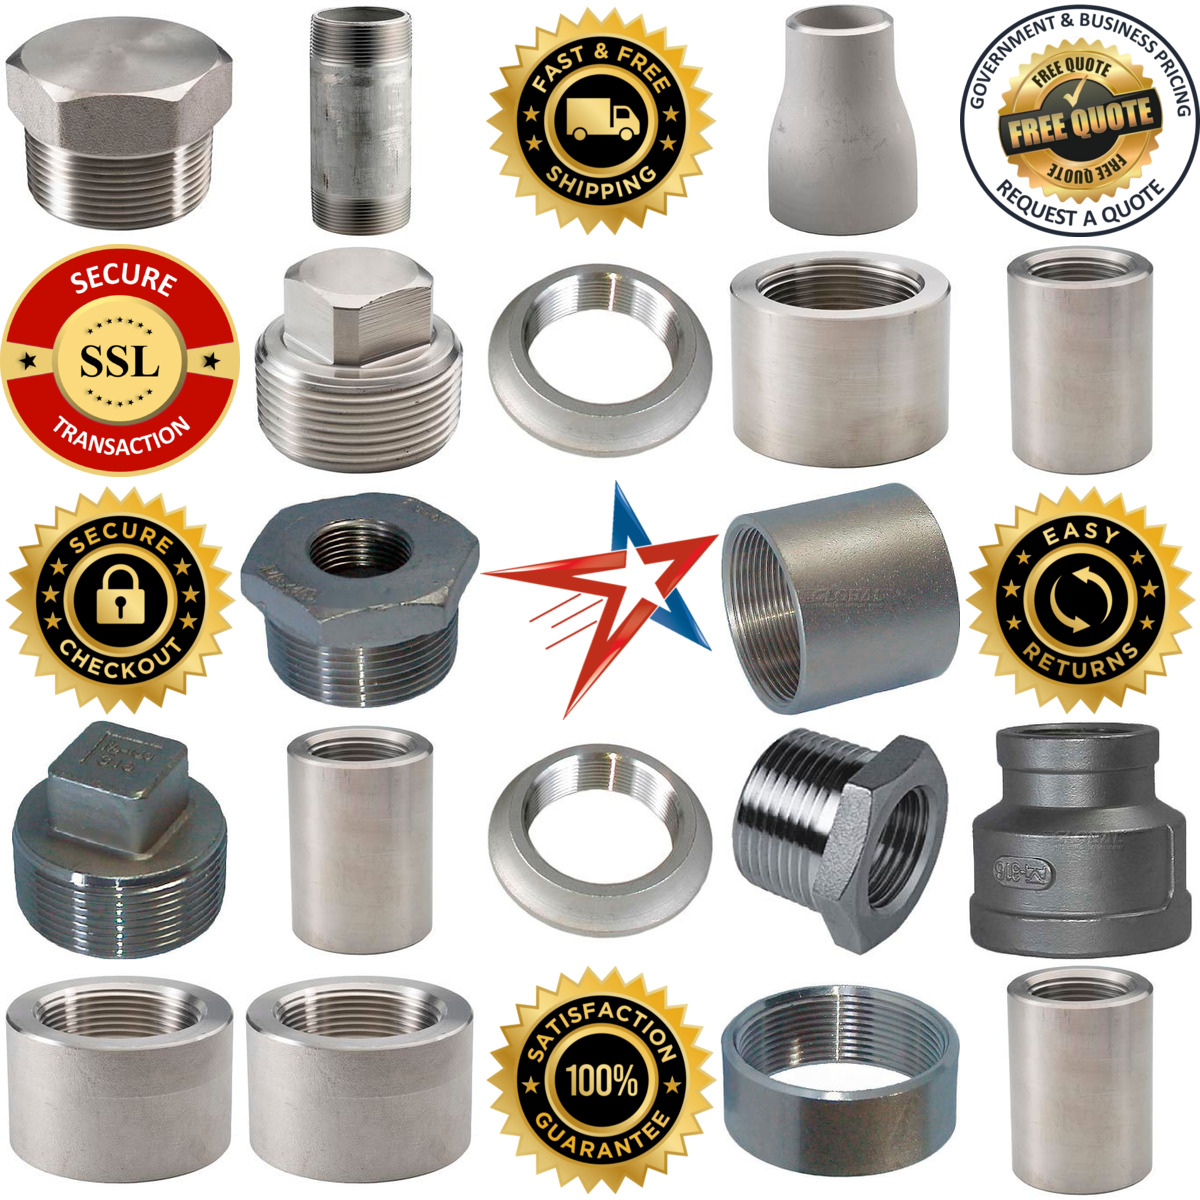 A selection of Stainless Steel Pipe Fittings products on GoVets